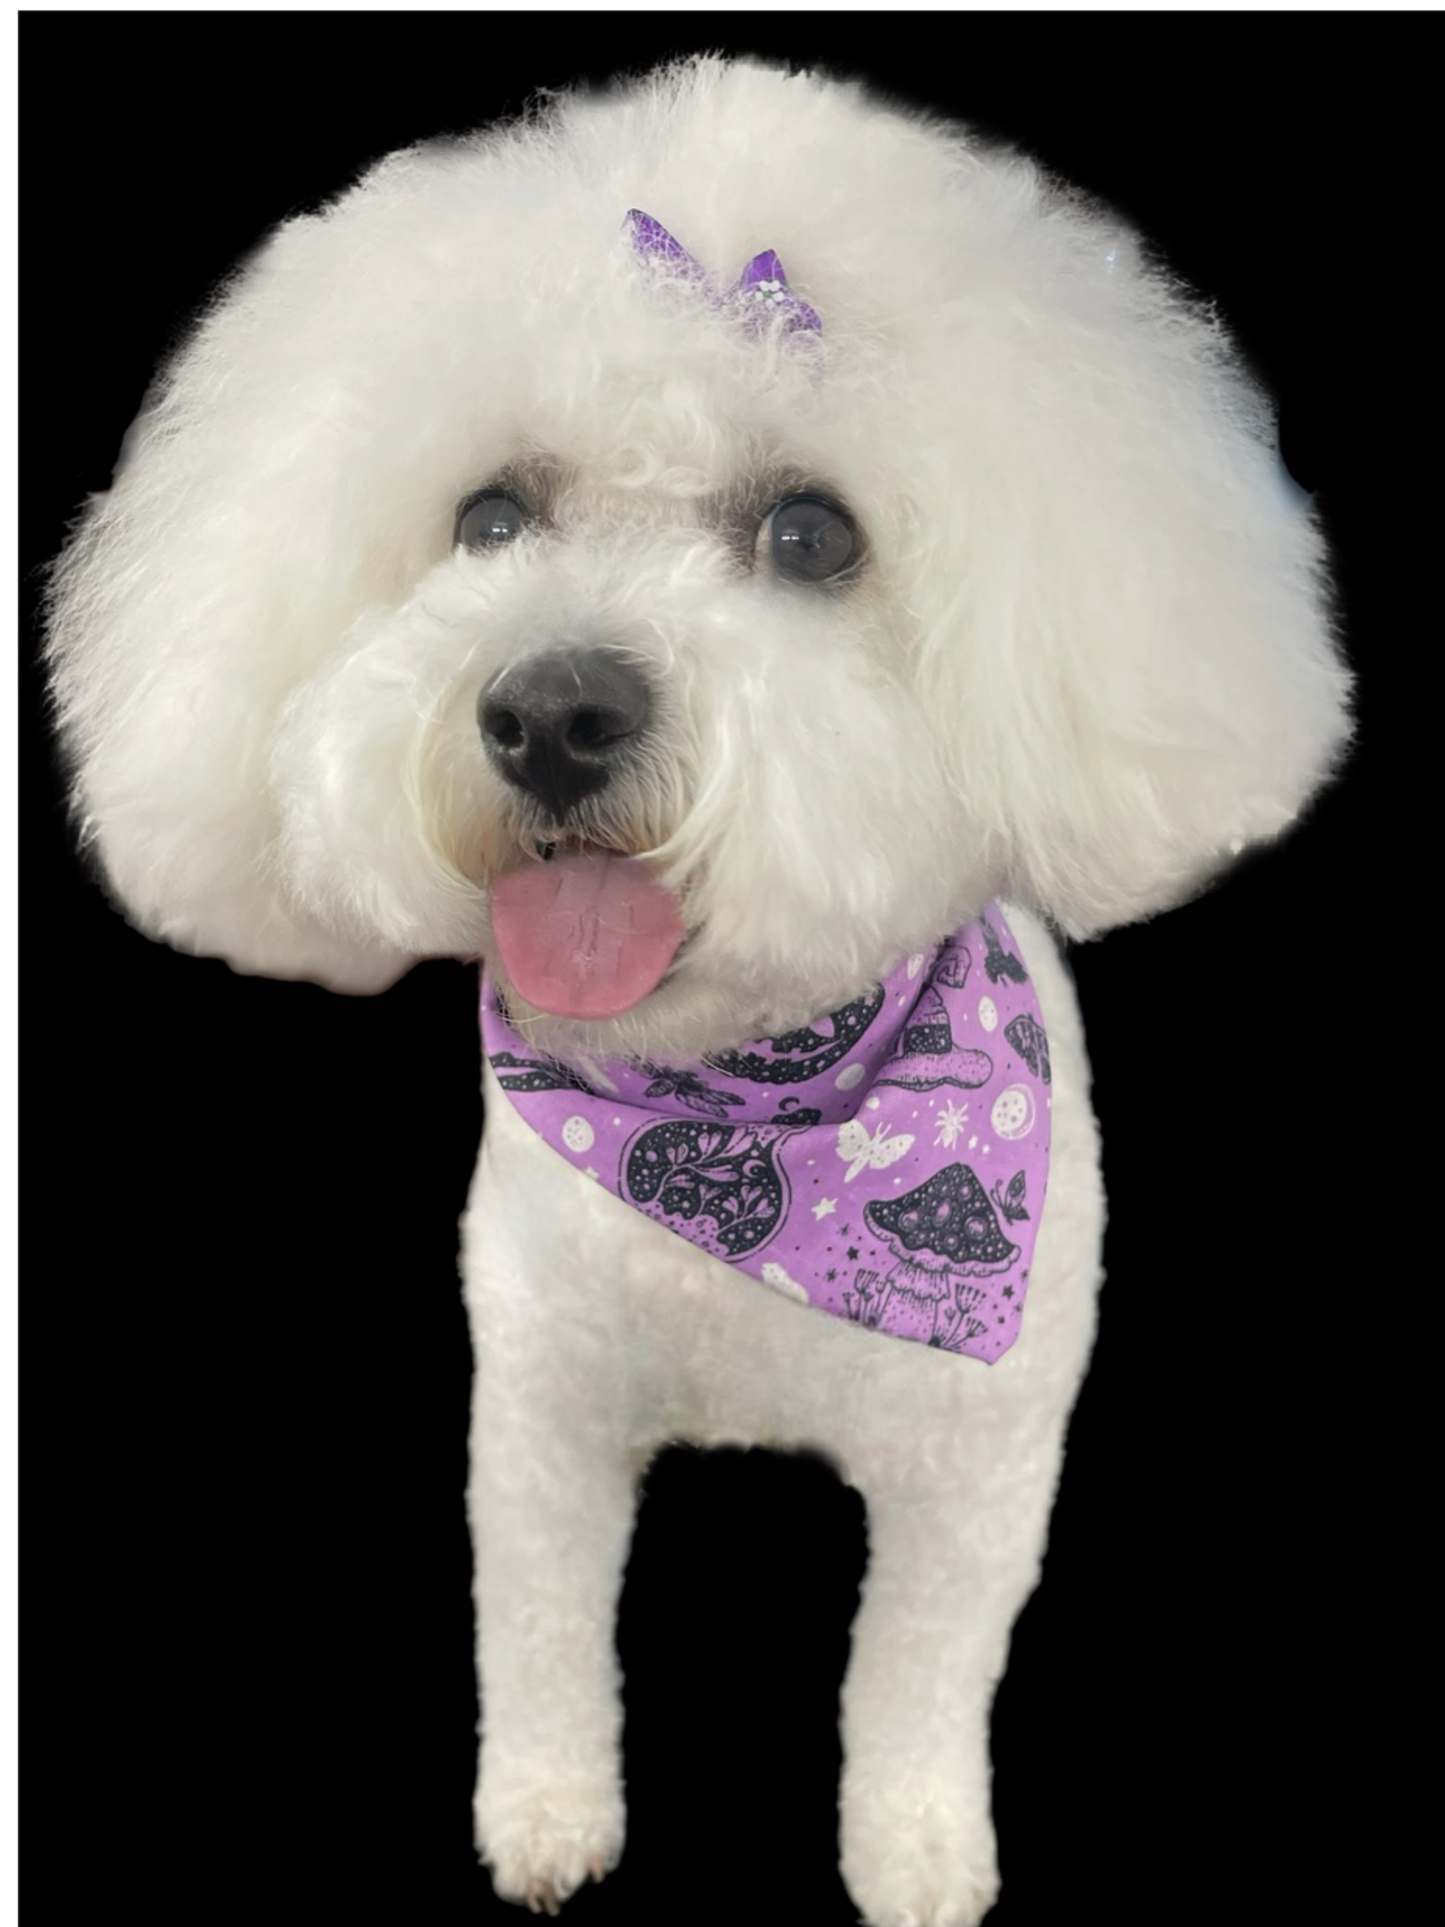 Halloween Bandana for the small dog cavoodle terrier dachshund reversible, cotton